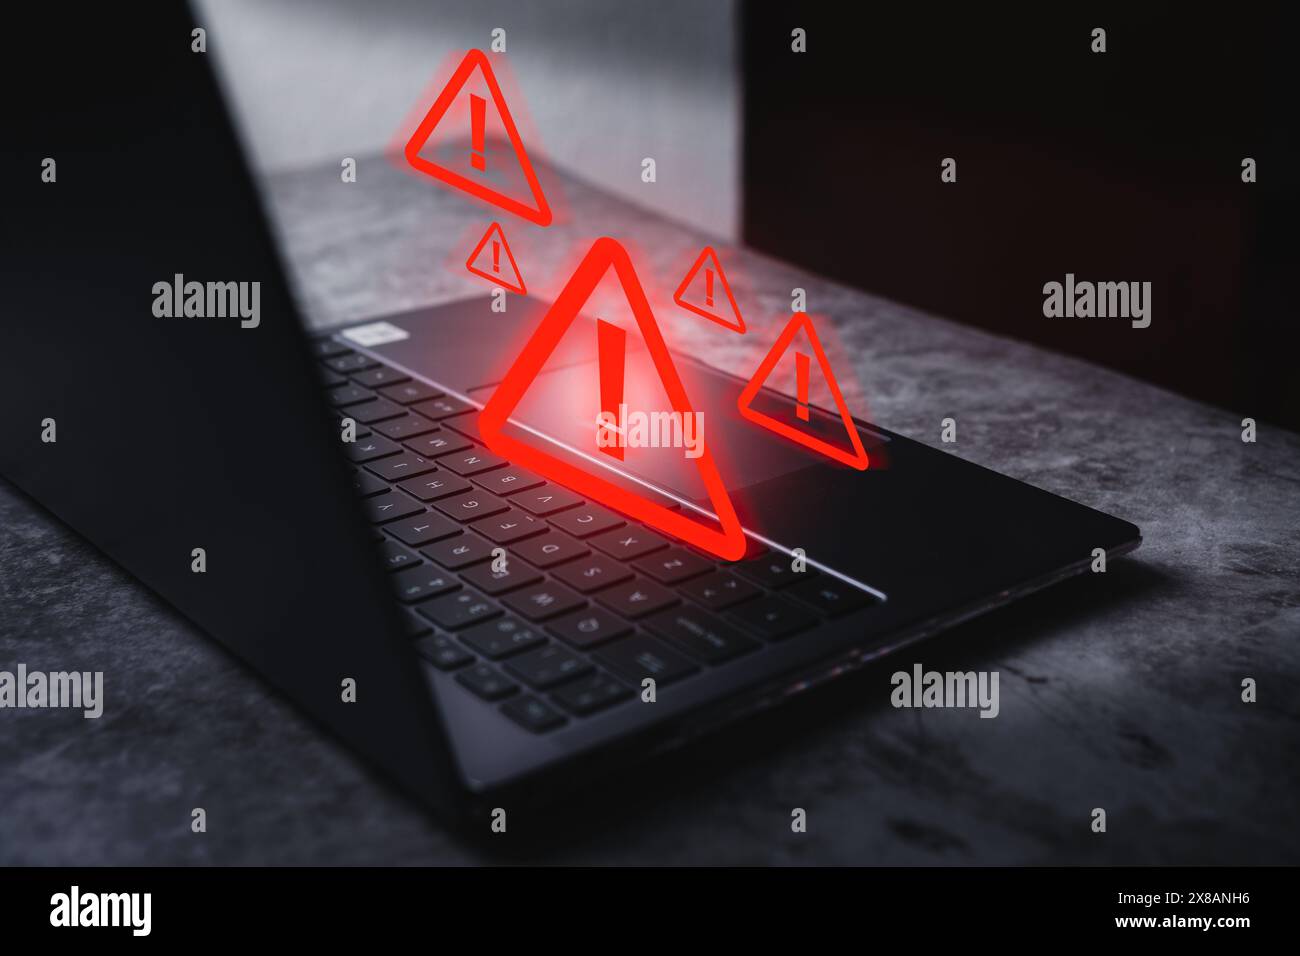 Laptop with hologram warning sign for notification error. Programmer, developer and maintenance system concept. Scam virus attack. Stock Photo